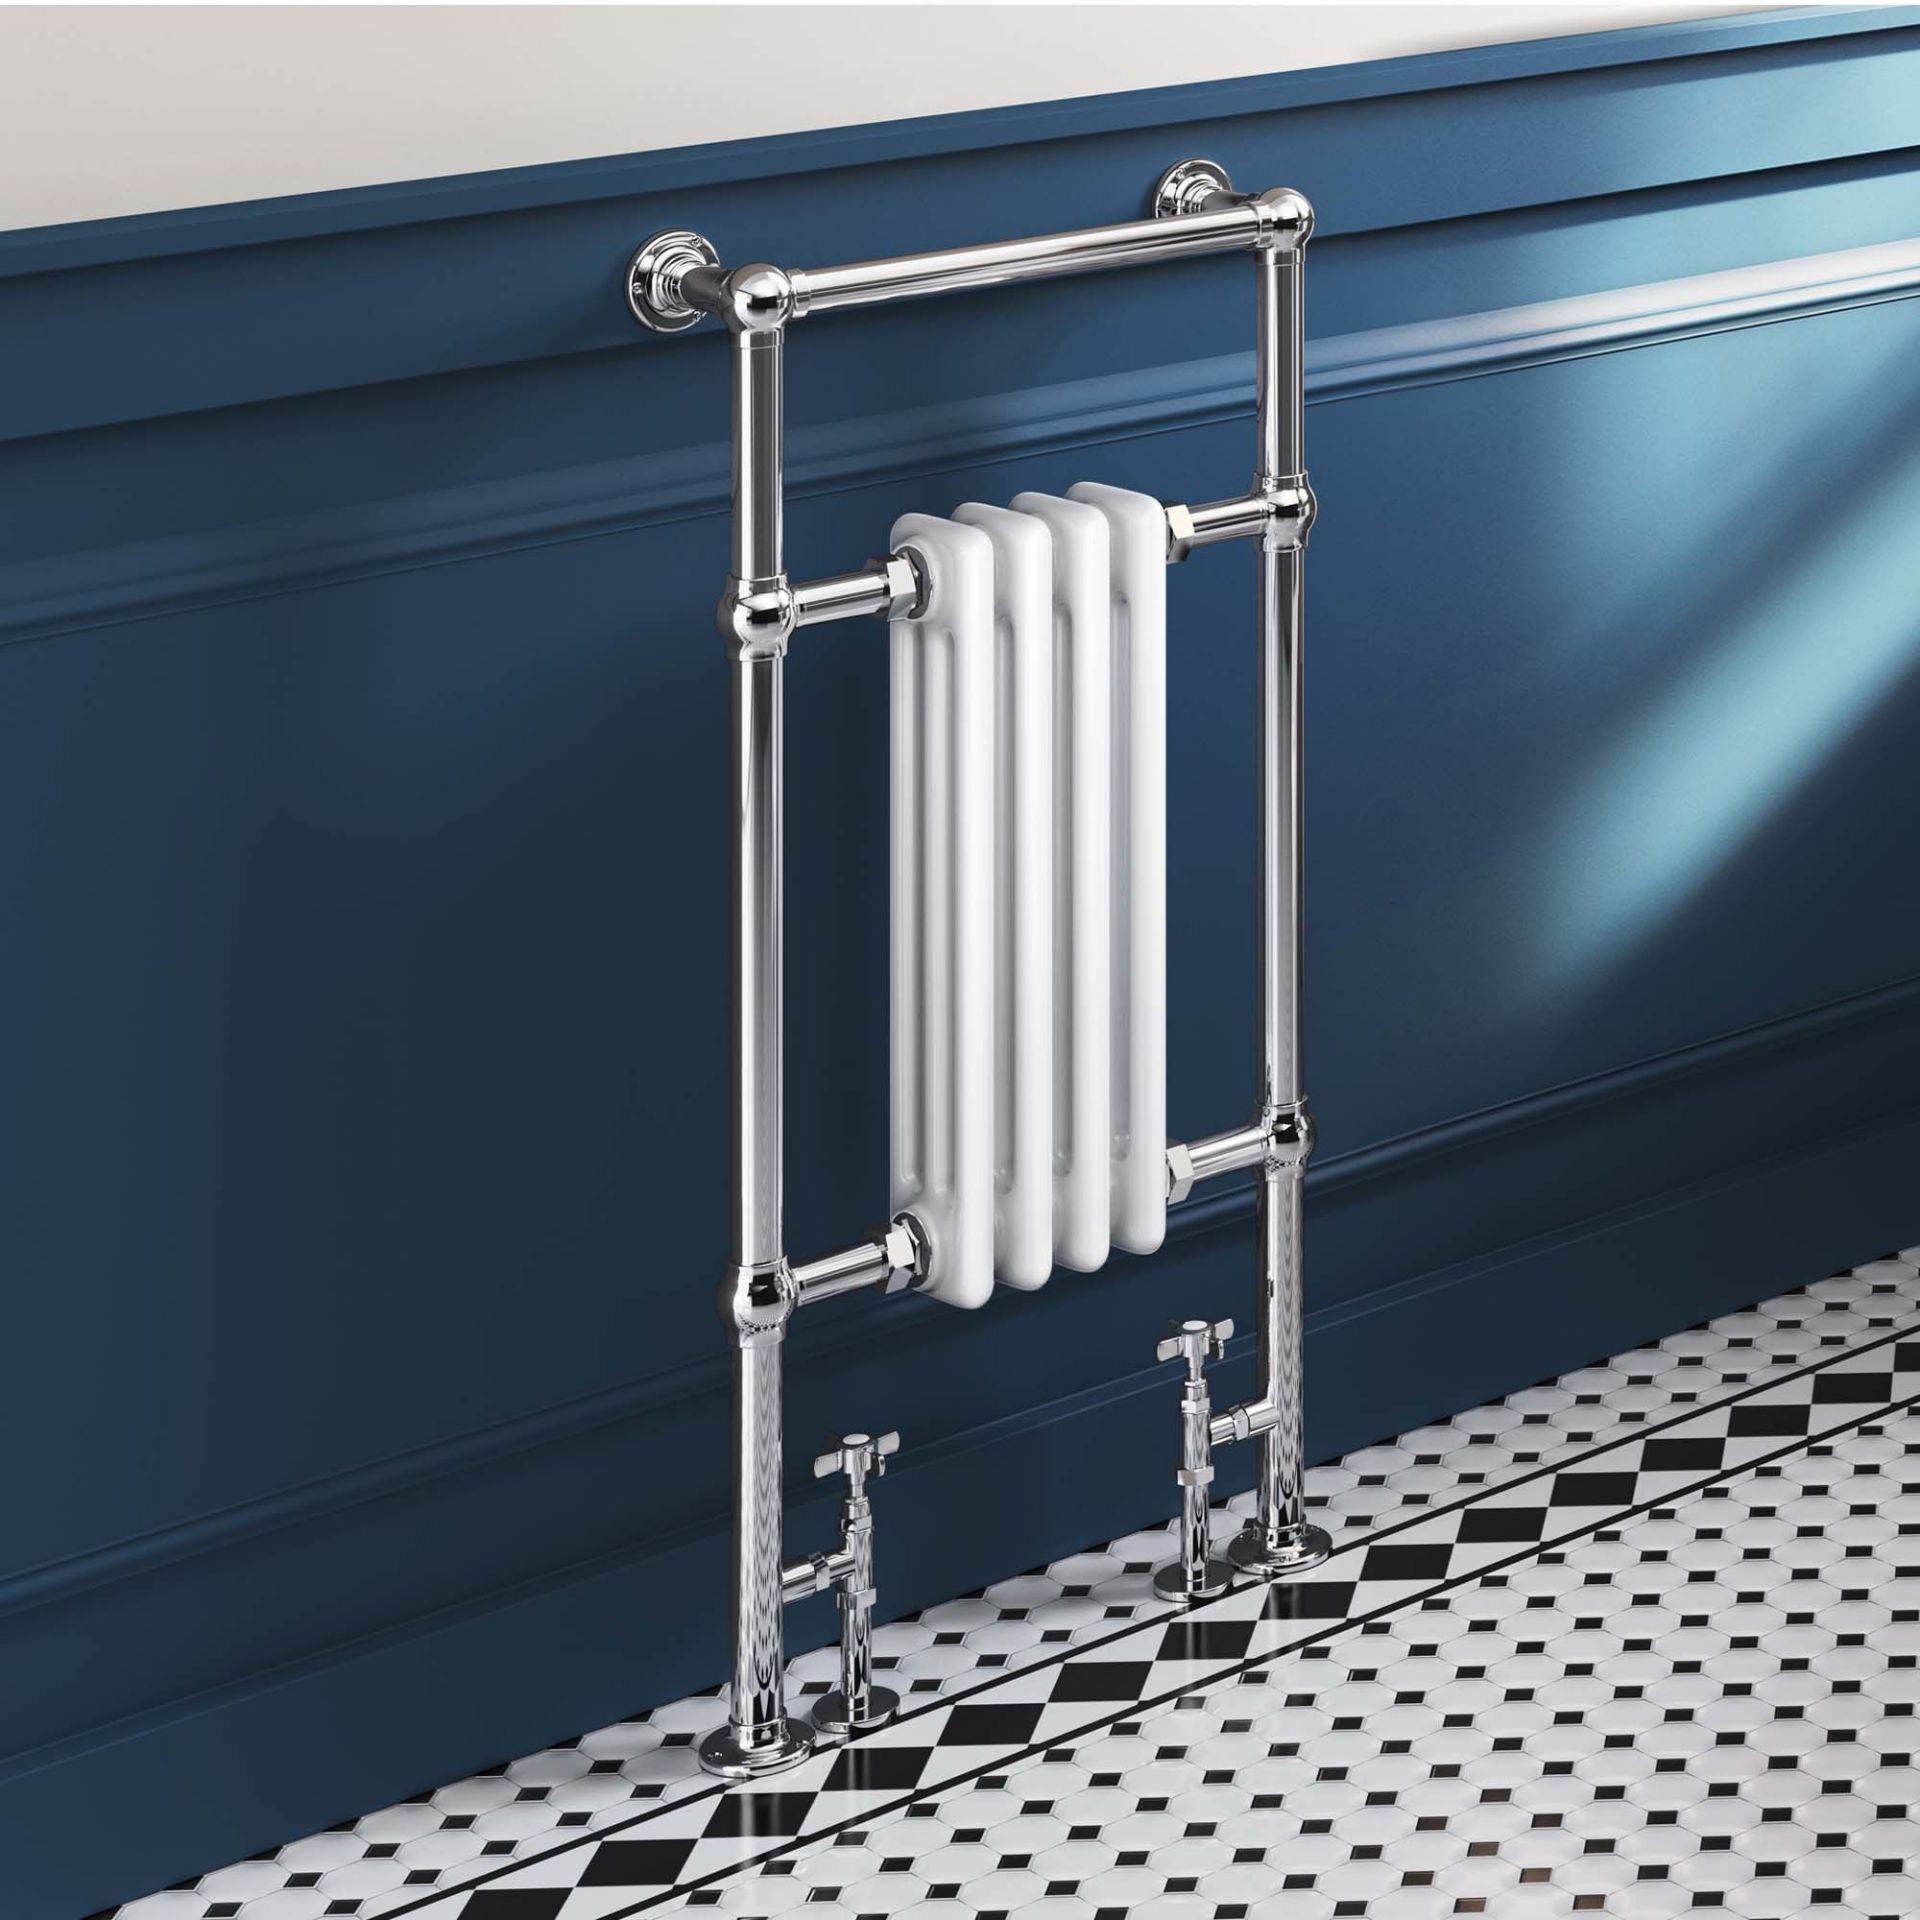 (OS21) 952x479mm Traditional White Slim Towel Rail Radiator - Cambridge. Made from low carbon steel,